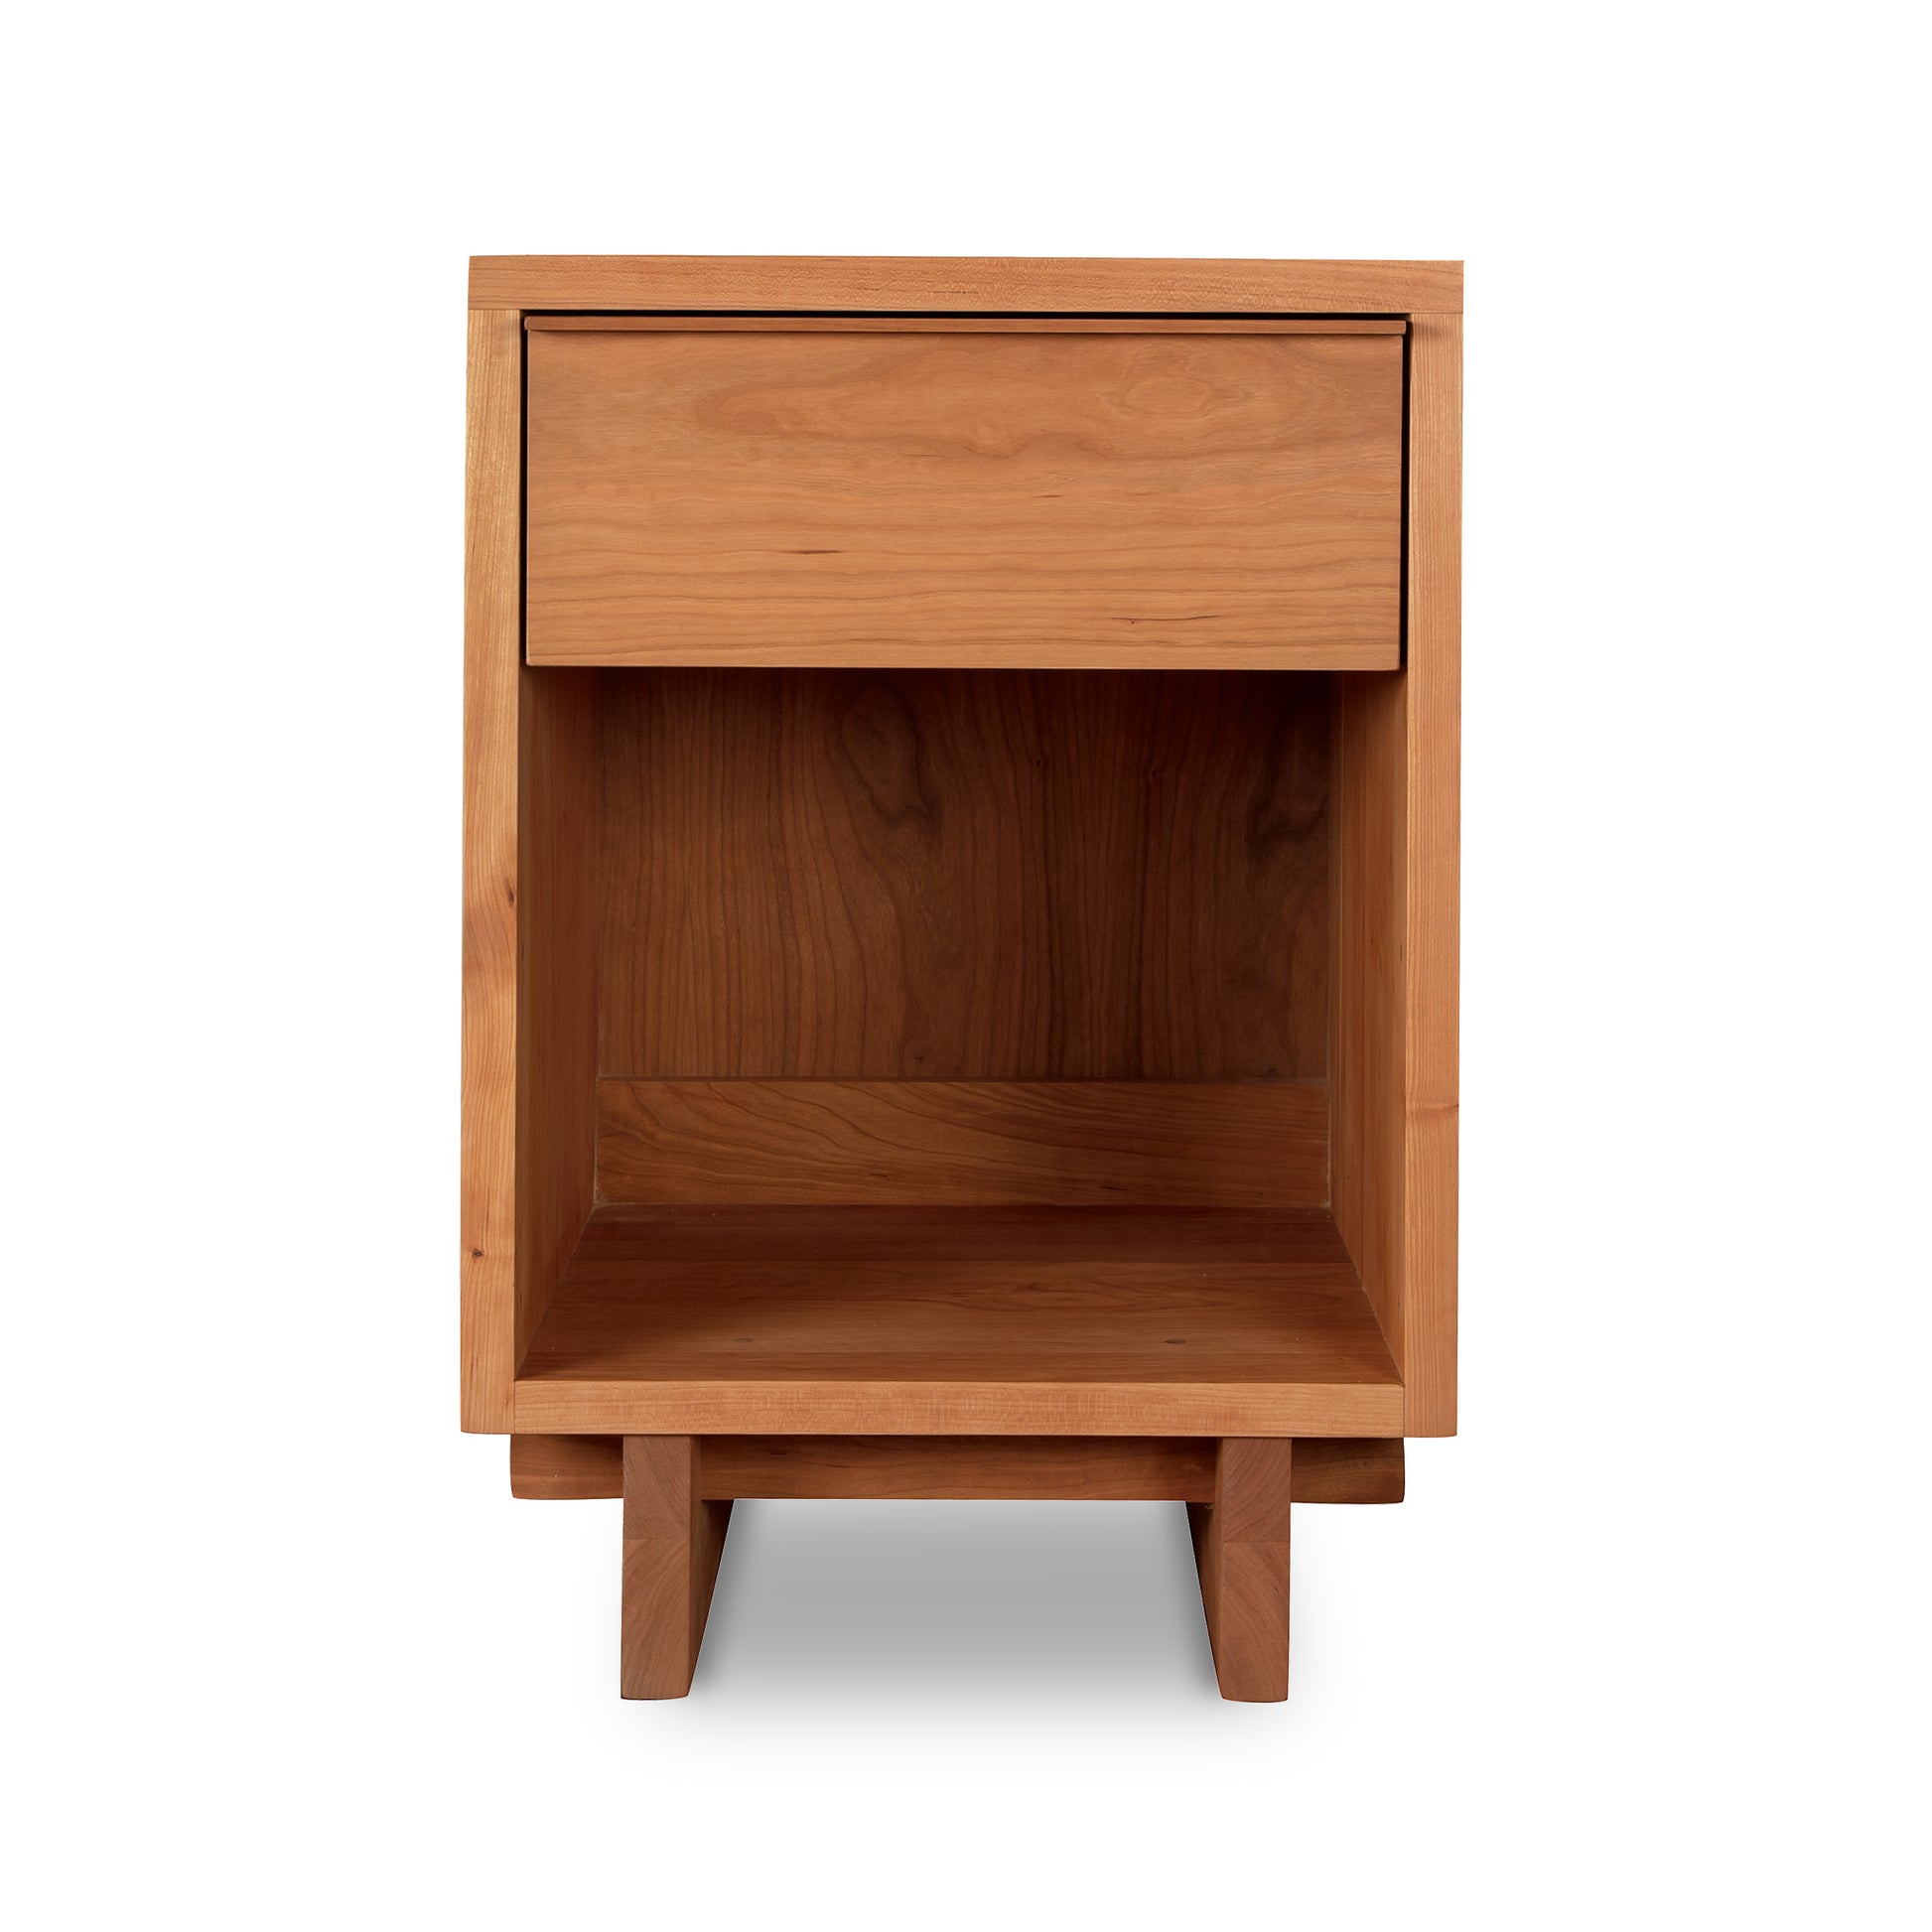 The Vermont Furniture Designs Kipling 1-Drawer Enclosed Shelf Nightstand, crafted with natural wood, is a must-have for fine furniture lovers.